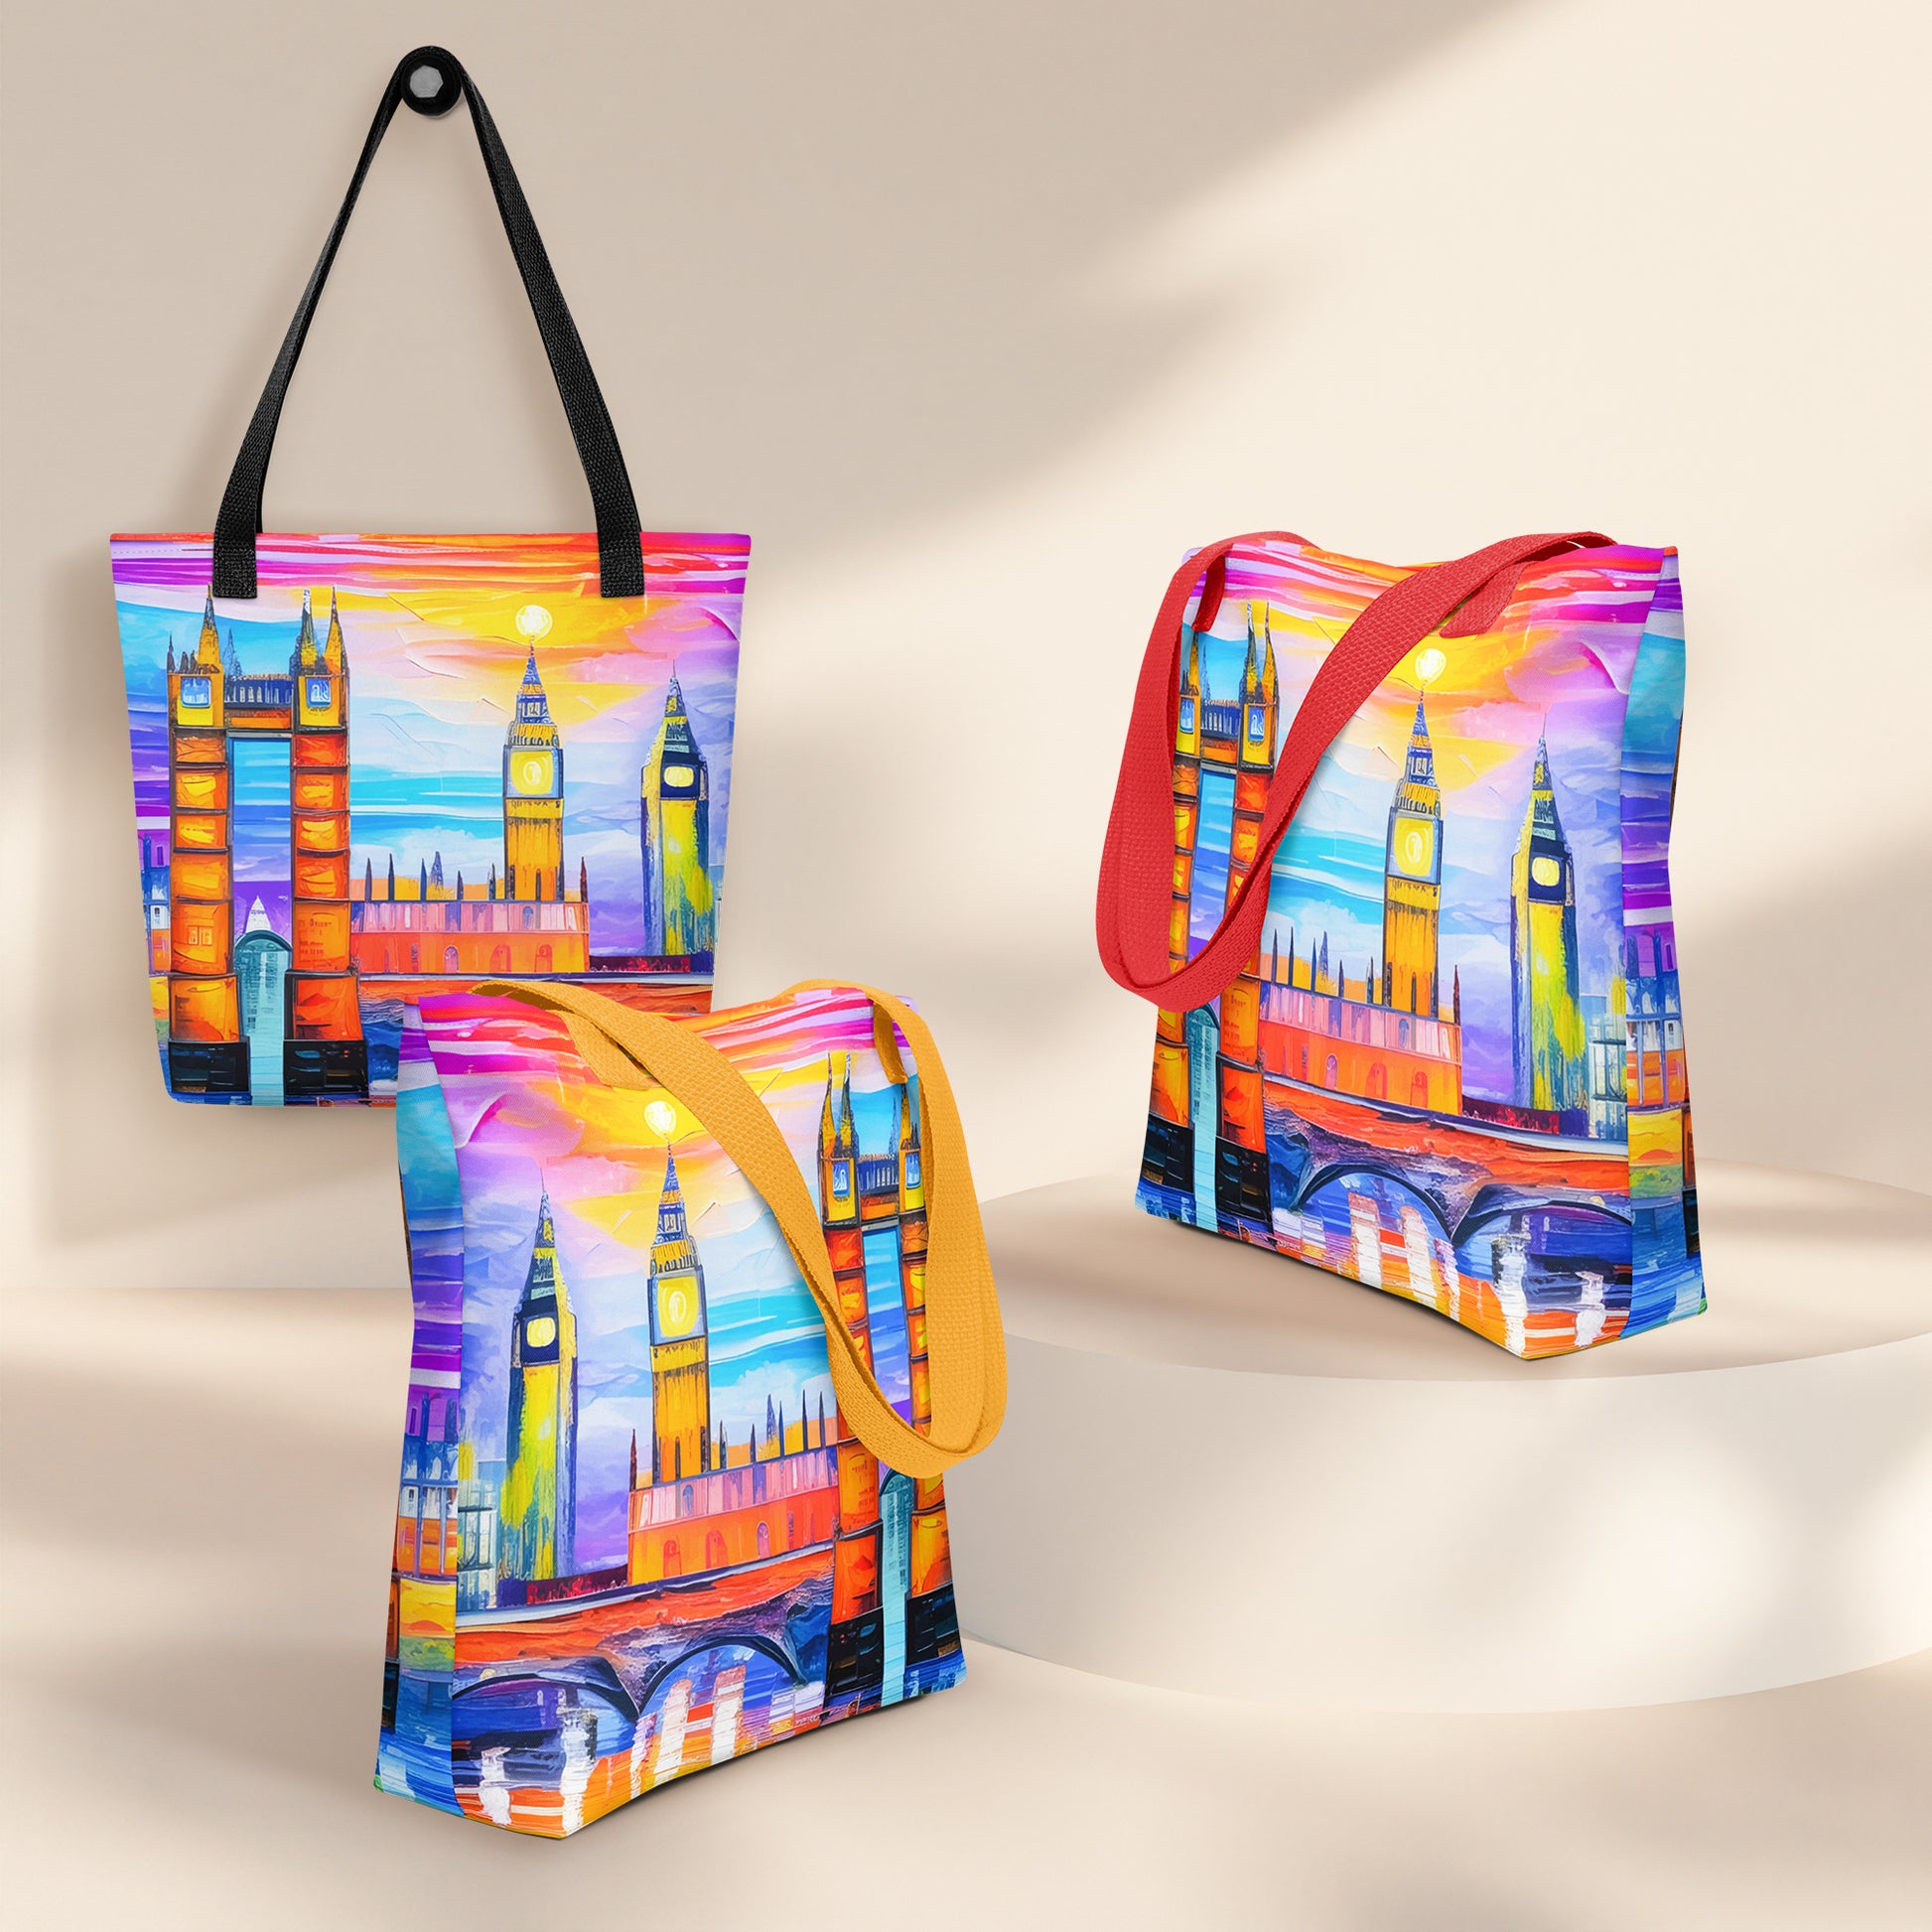 Large tote bag with cityscape painting - London | Seepu